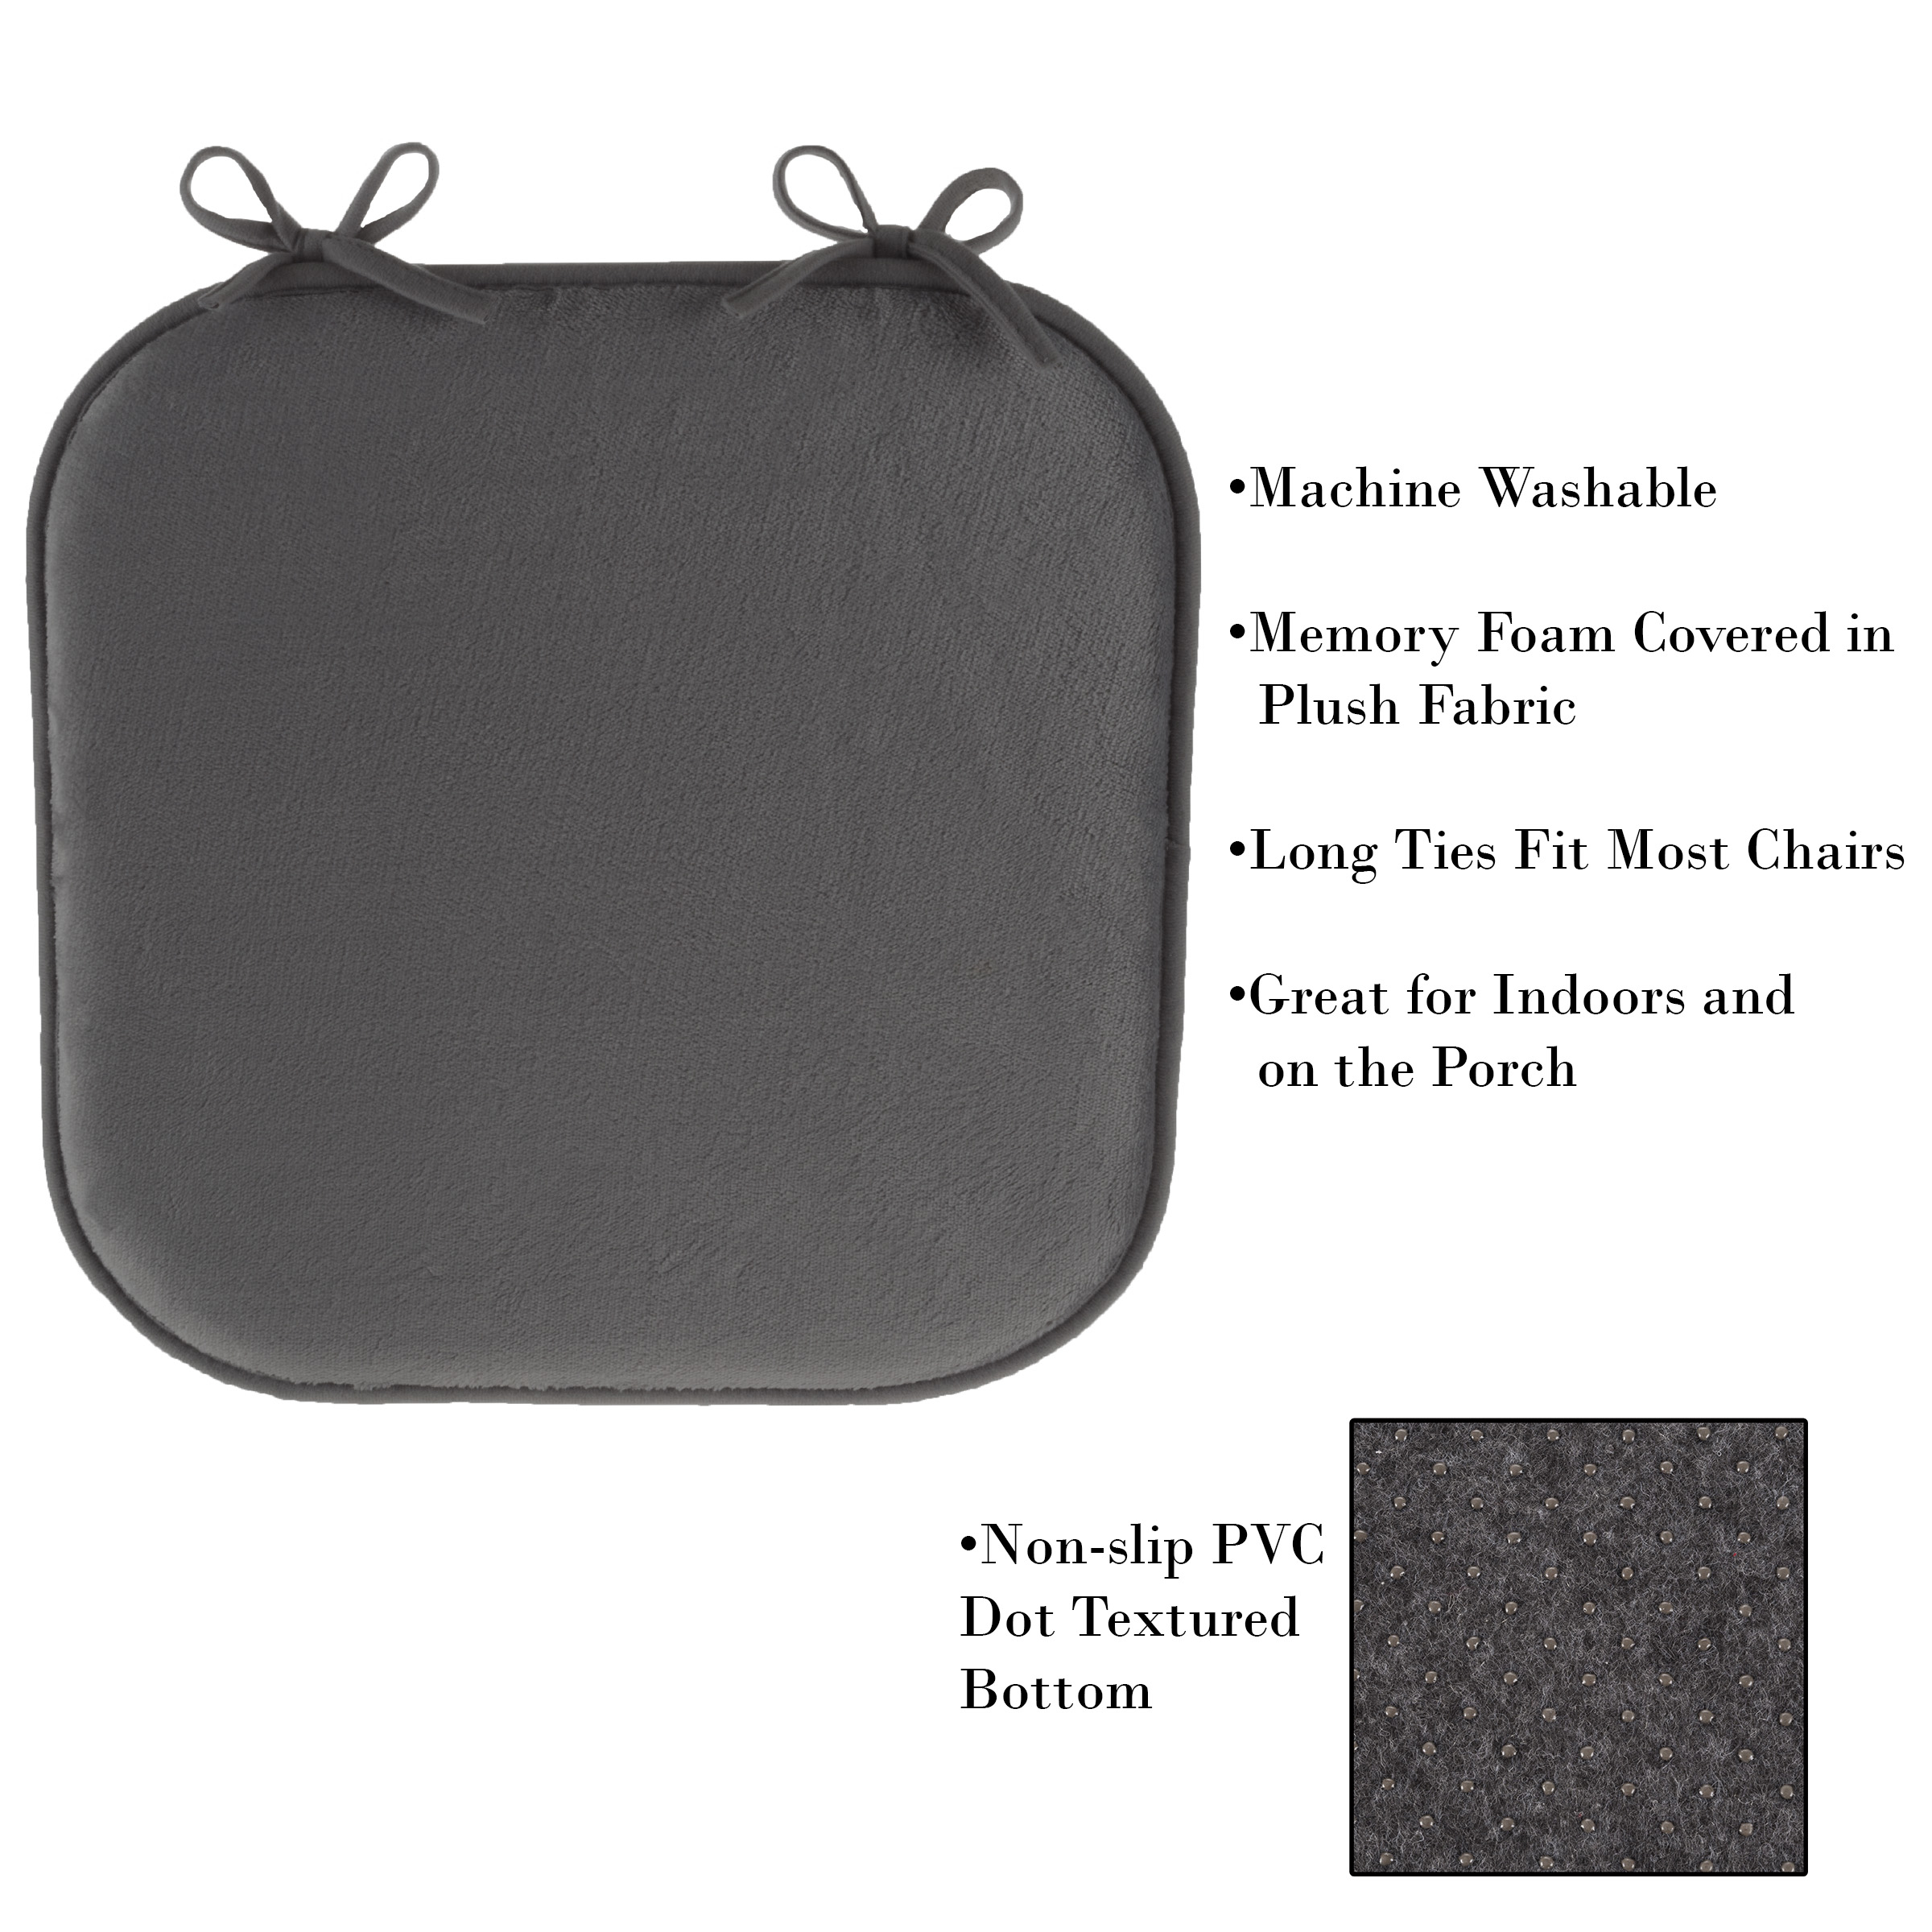 Memory Foam 16 X 16 Plush Chair Cover Cushion With Ties 1 Inch Thick Comfy Non Slip Charcoal